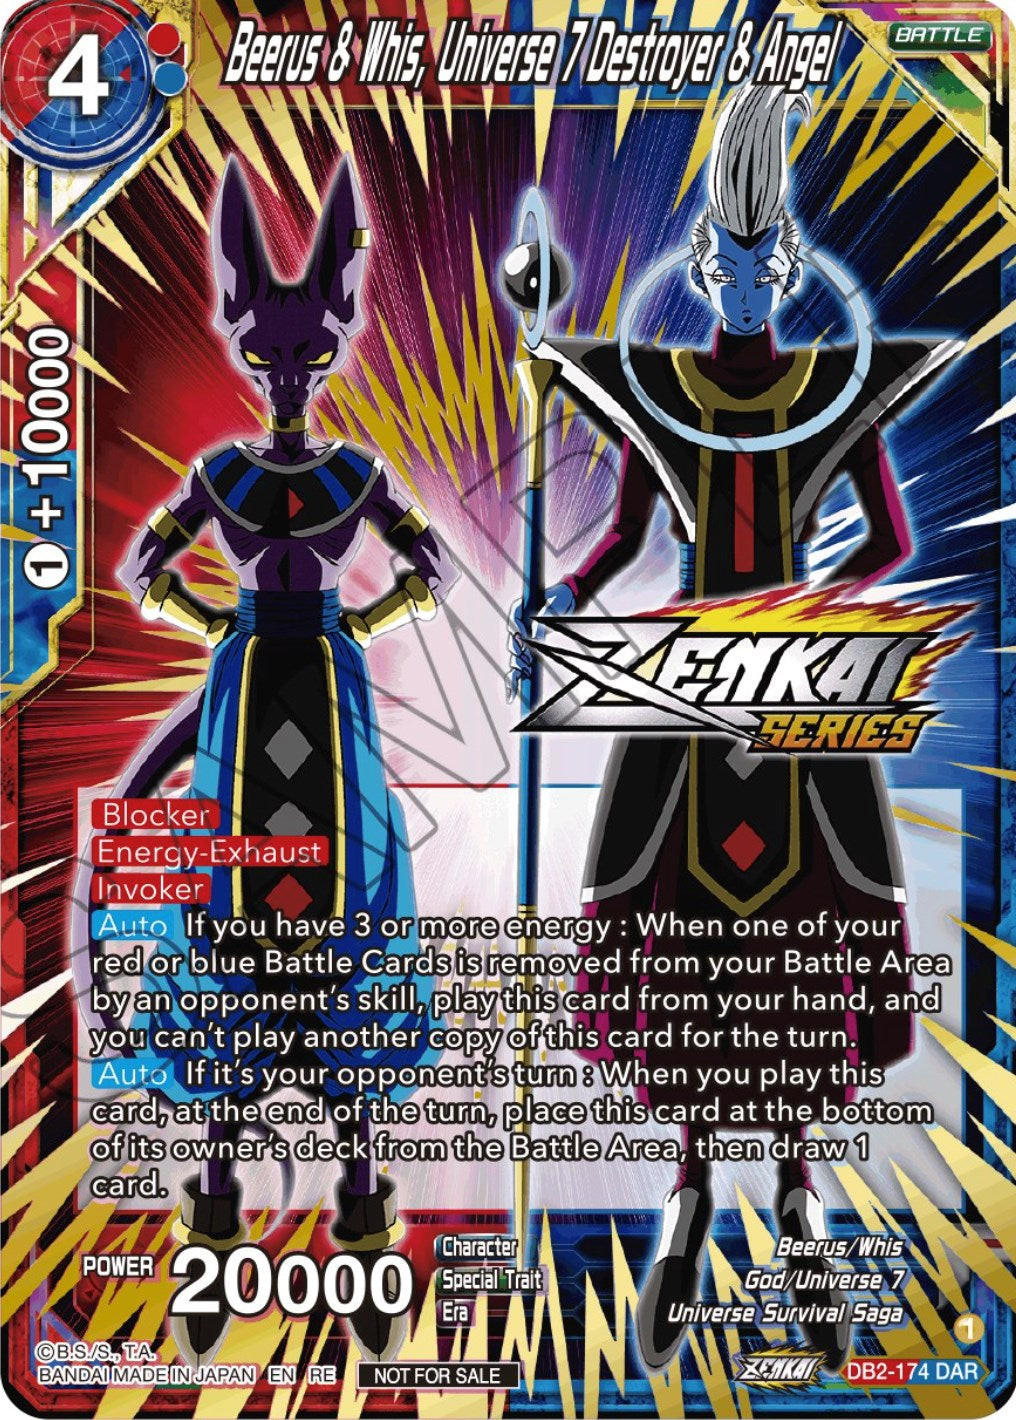 Beerus & Whis, Universe 7 Destroyer & Angel (Event Pack 12) (DB2-174) [Tournament Promotion Cards] | Red Riot Games CA